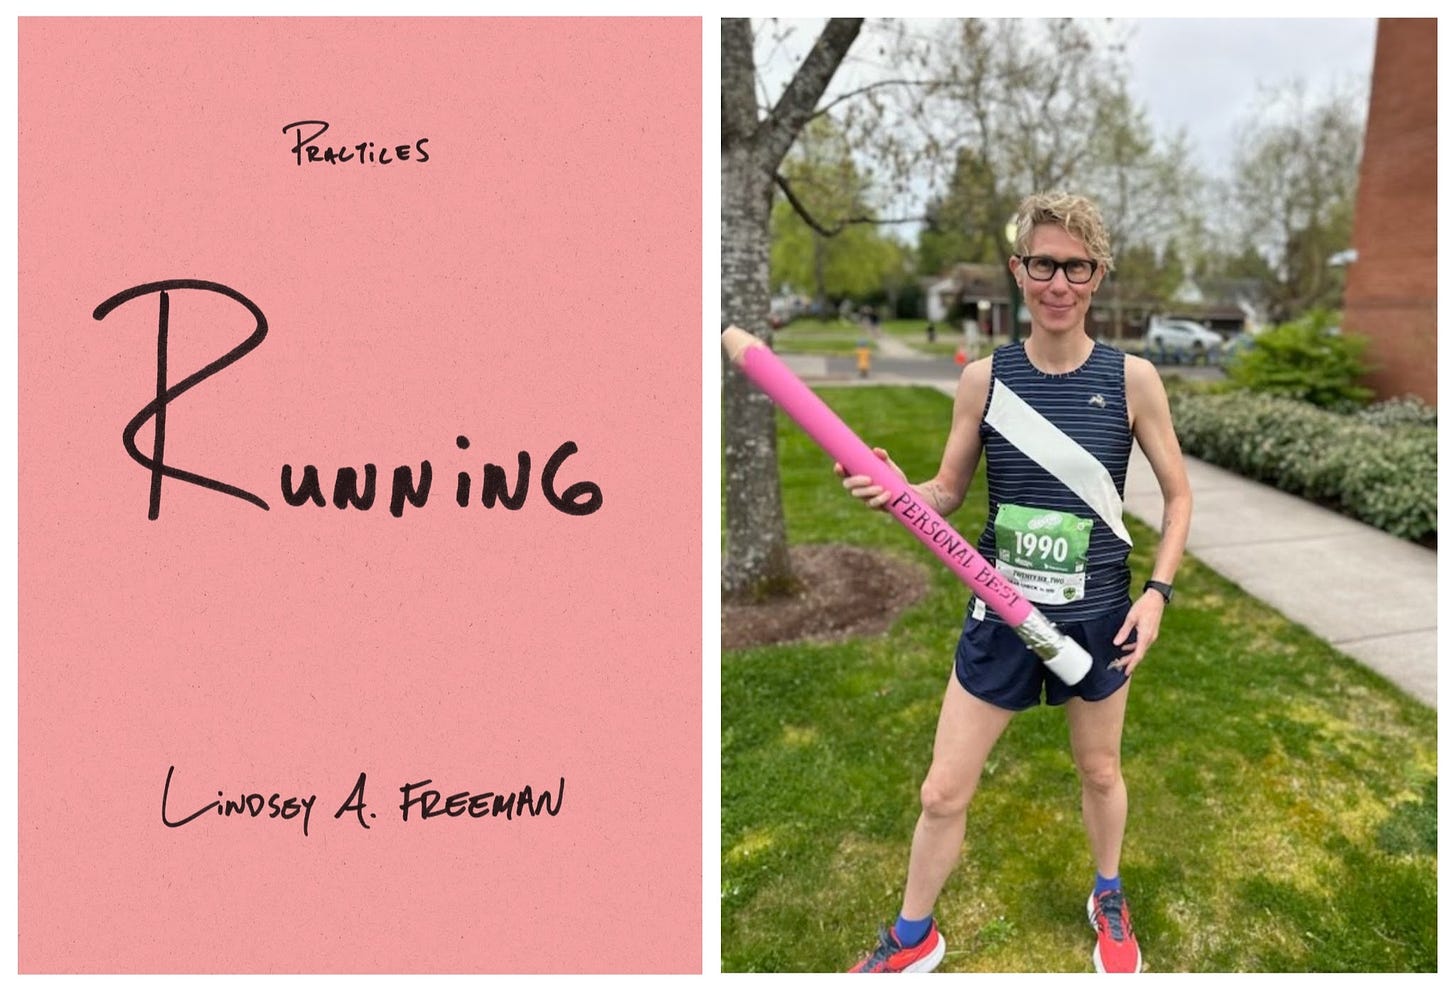 Running (Practices) by Lindsey A. Freeman and a photo of the author